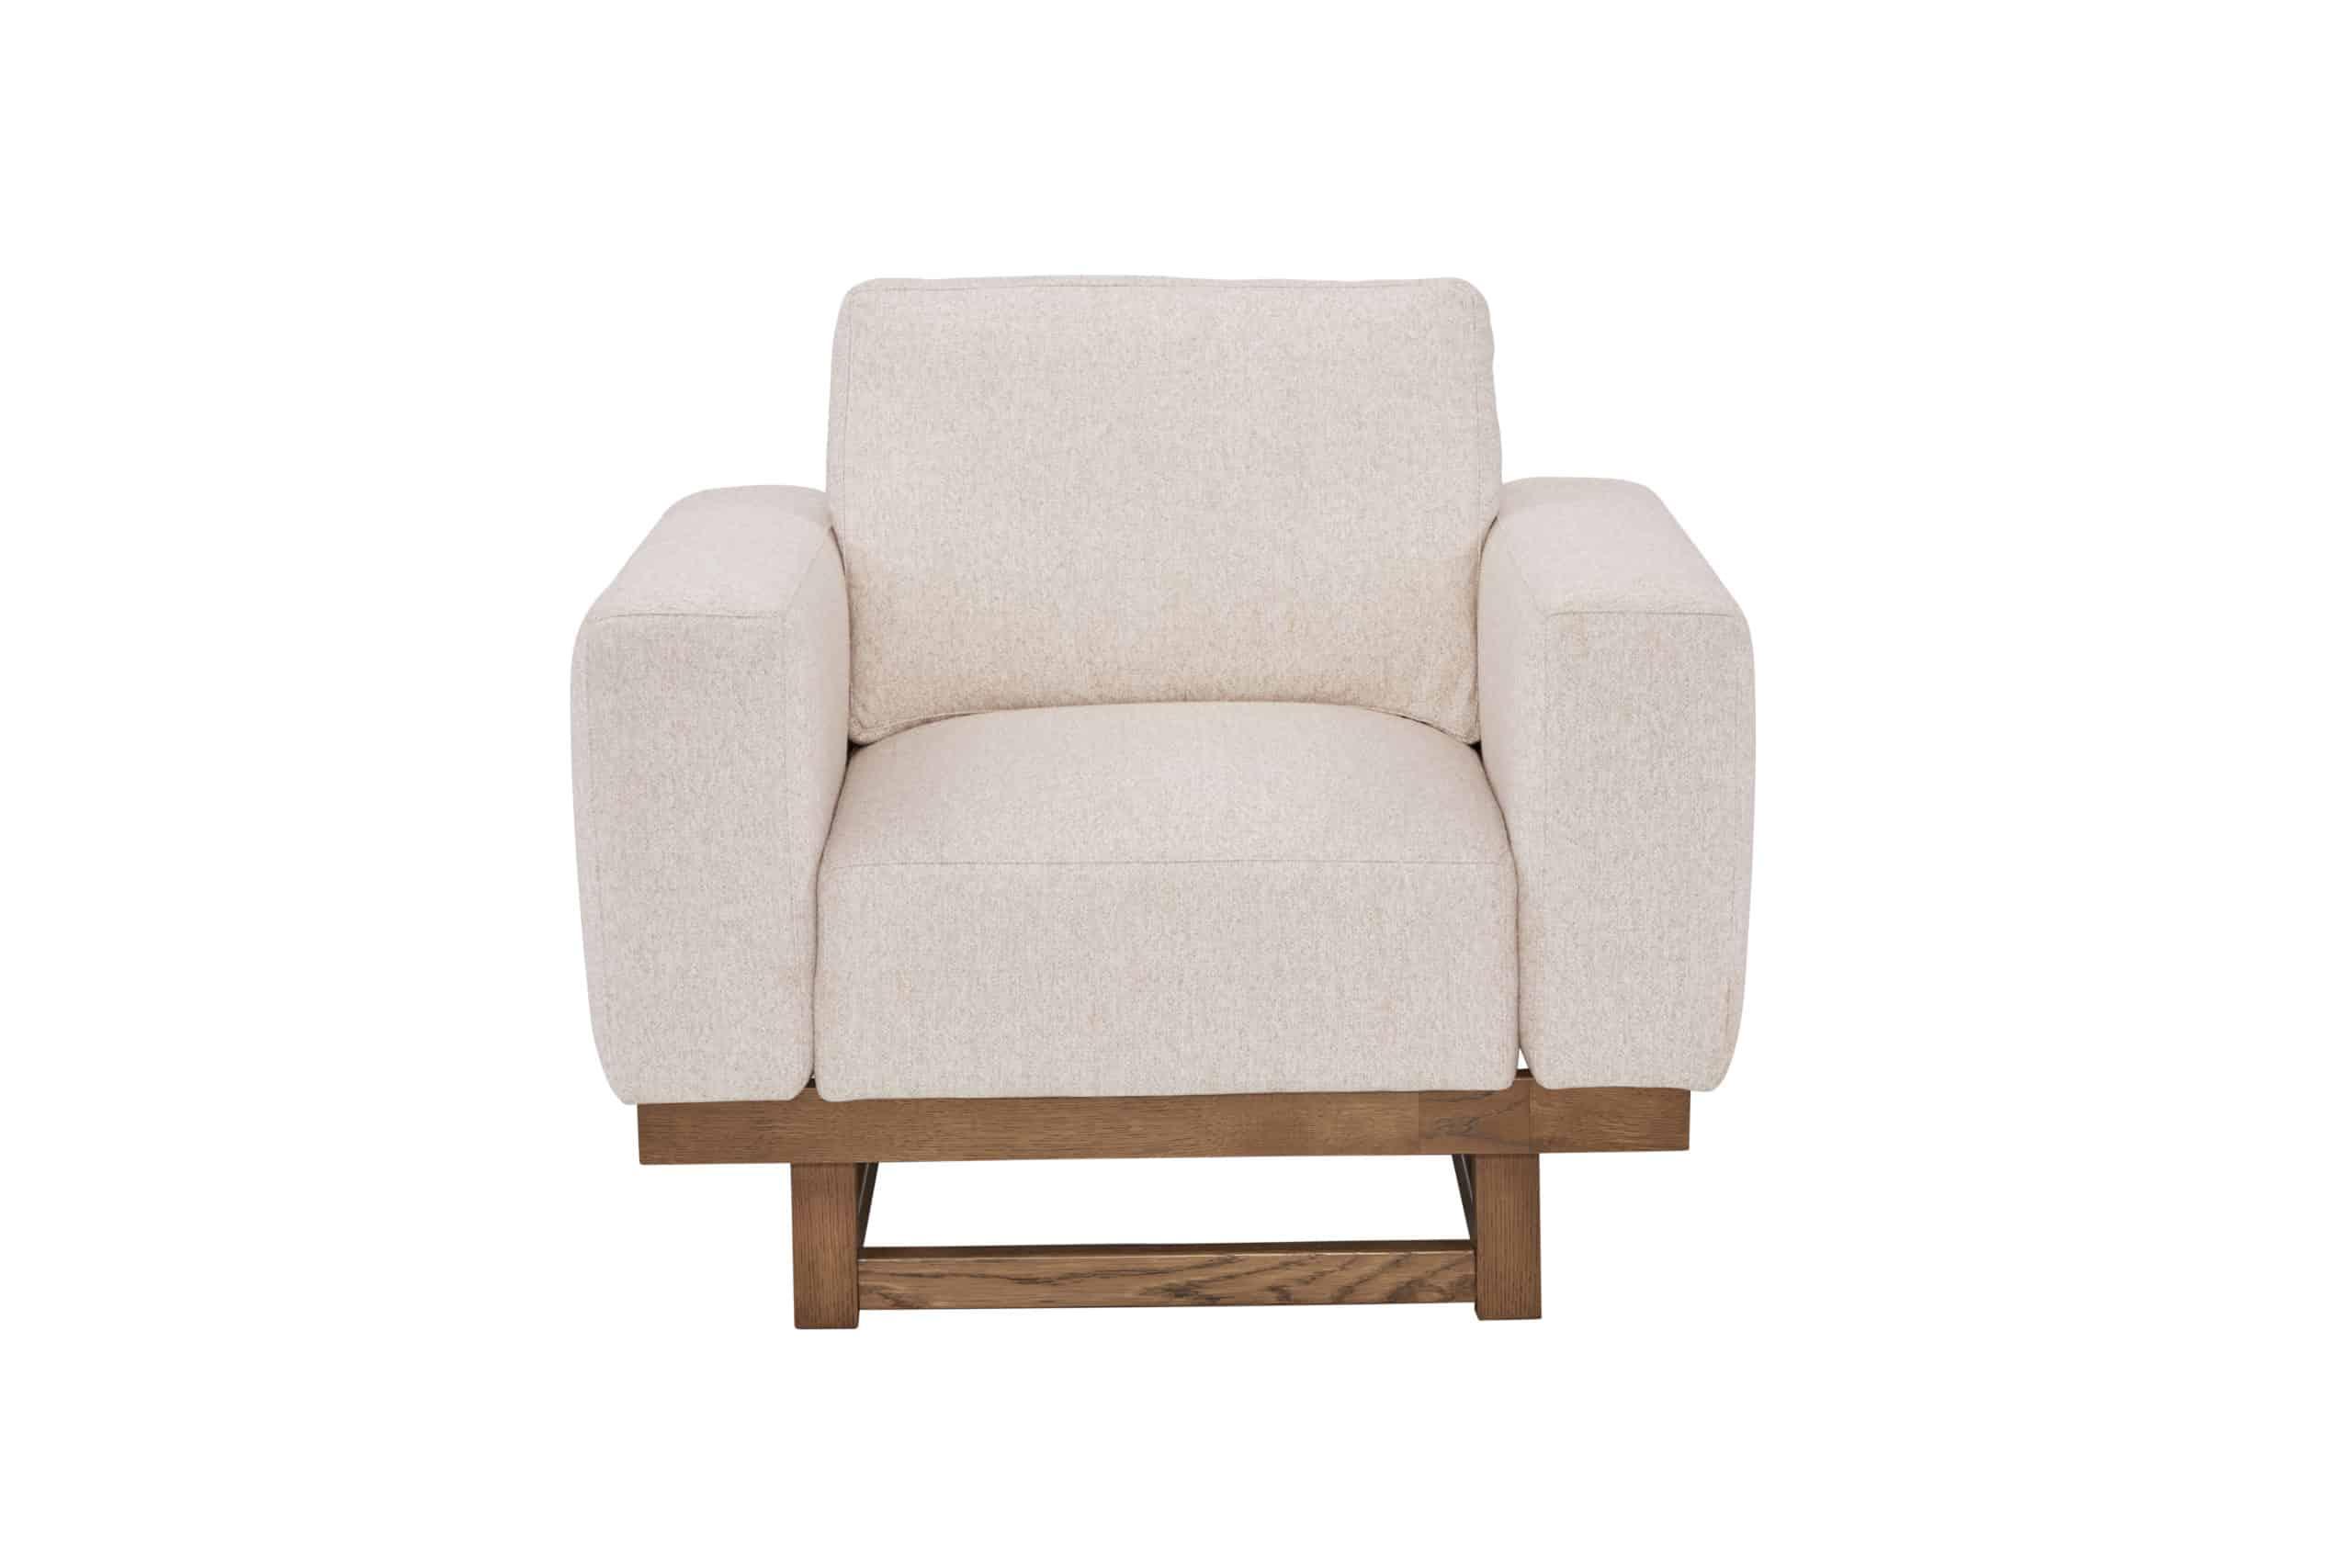 Modern, Traditional Oversized Chair Floating Track 758523-5062 in Beige 